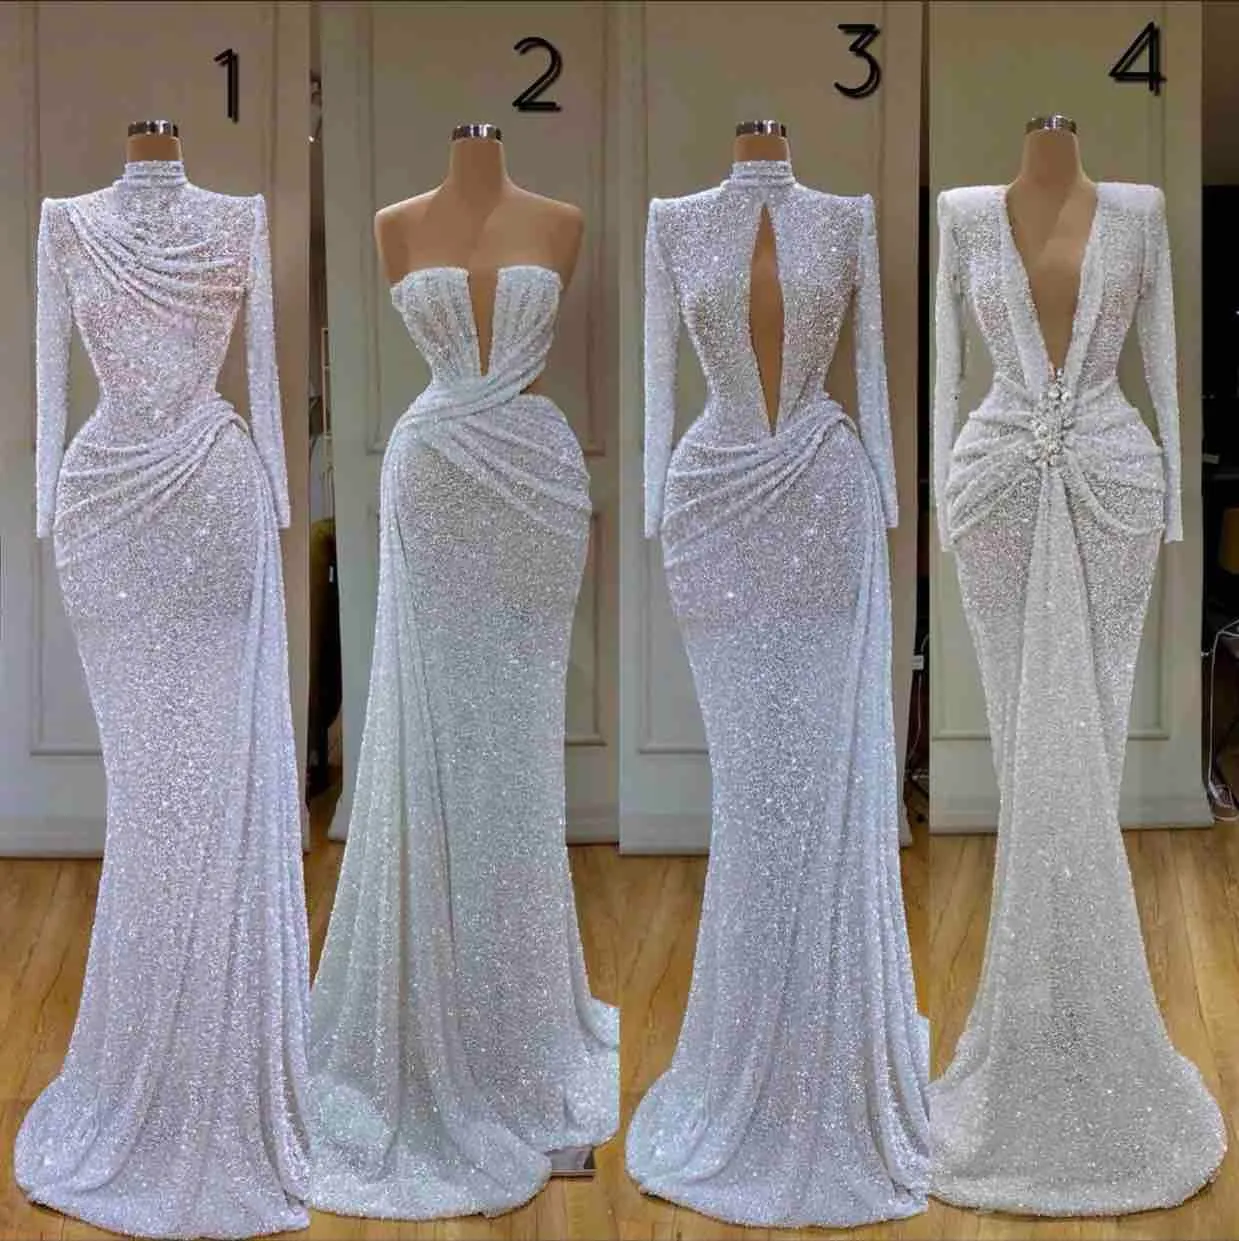 2021 Glitter Mermaid Evening Dresses Sequins Long Sleeve Sweep Train Formal Party Gowns Custom Made Prom Dress